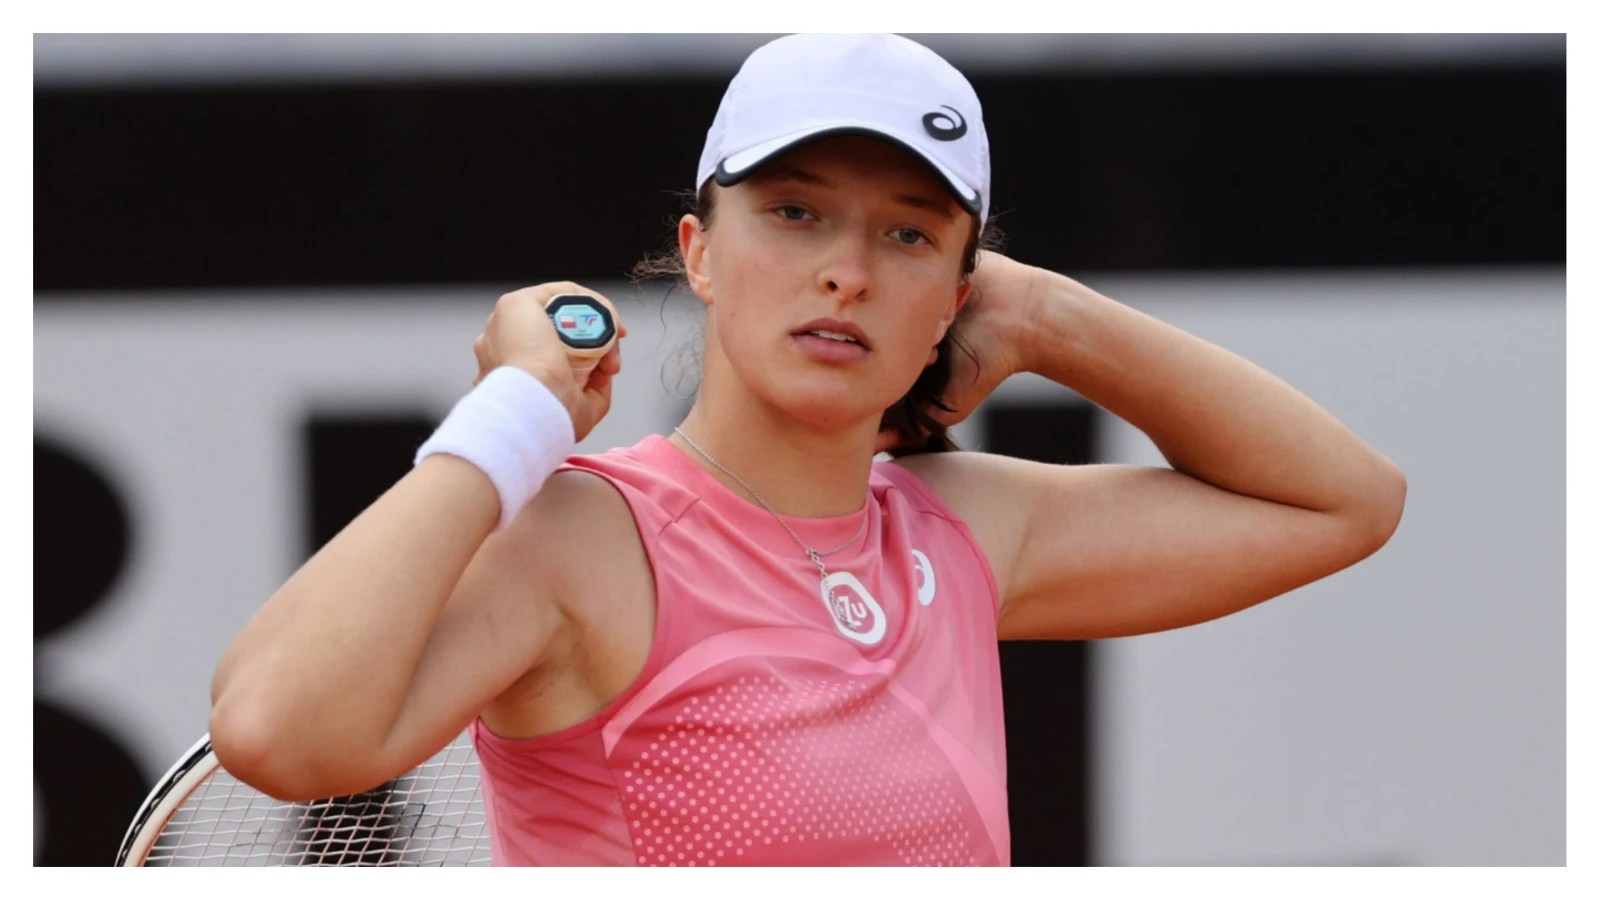 Iga Swiatek Husband Is Polish Tennis Star Married? Know all about her